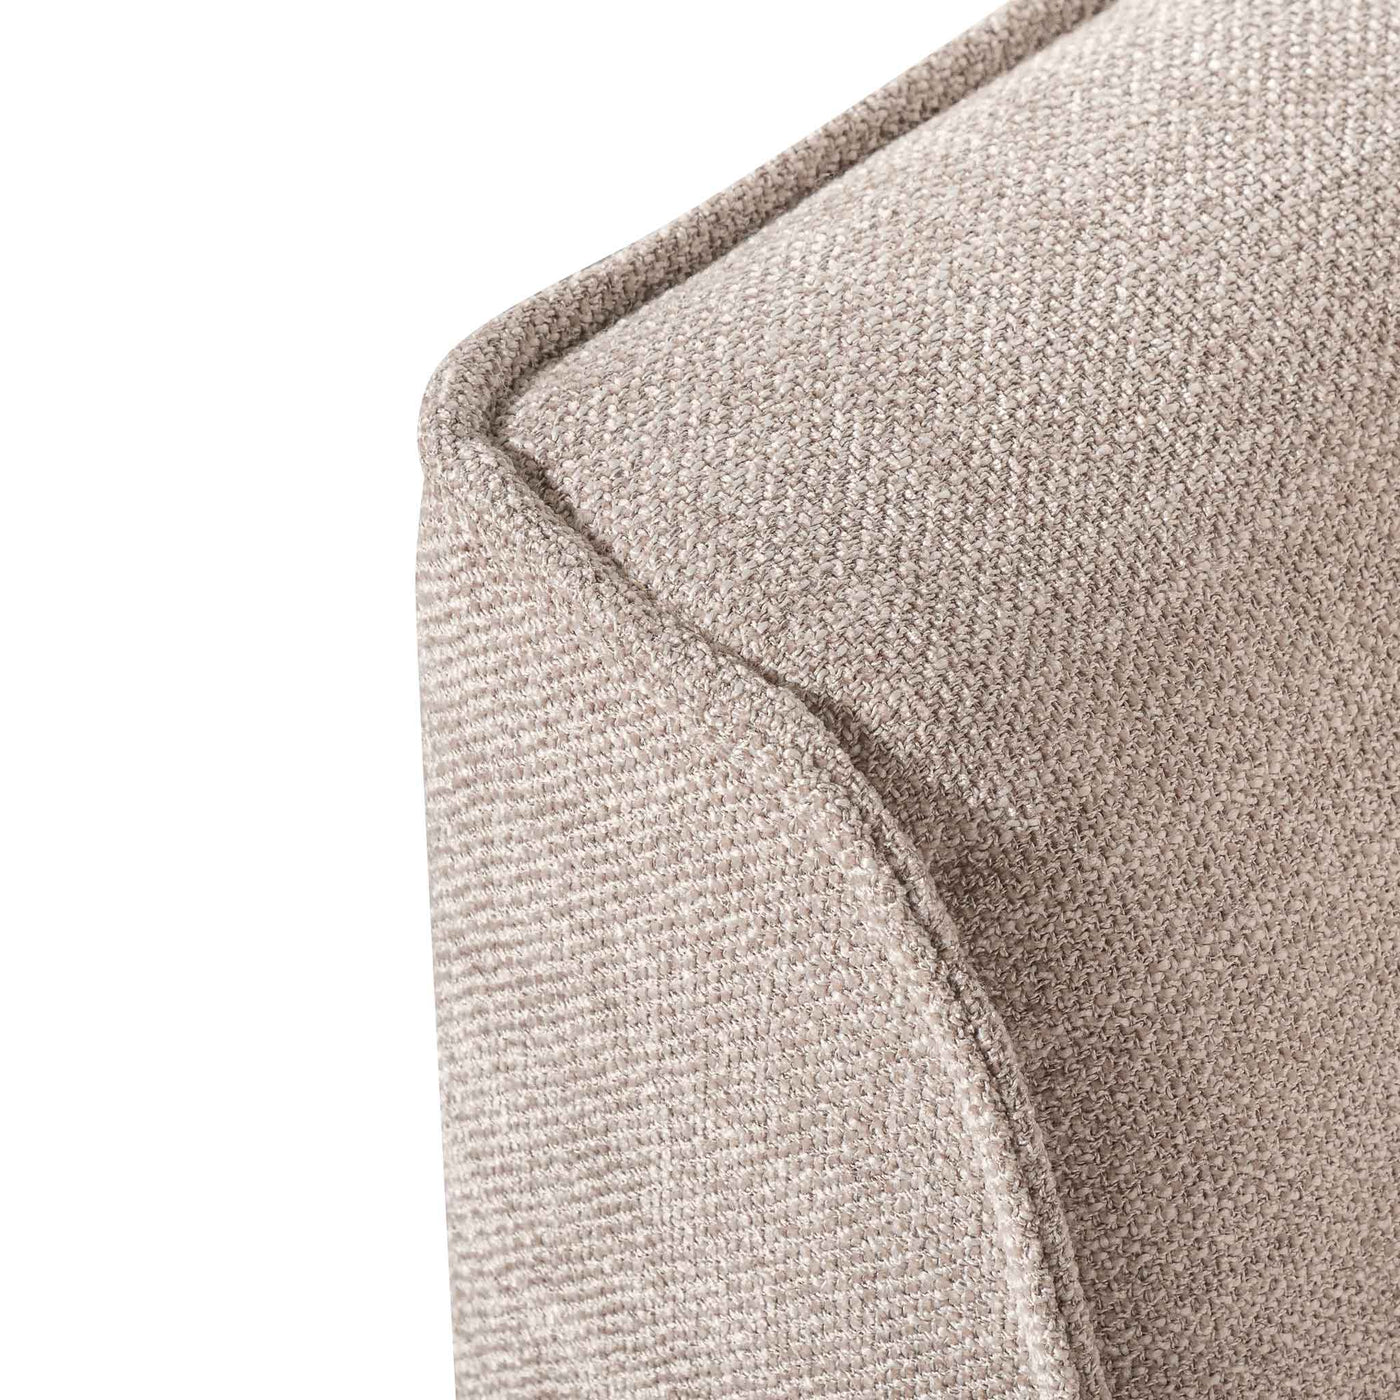 2 Seater Fabric Sofa - Oyster Beige